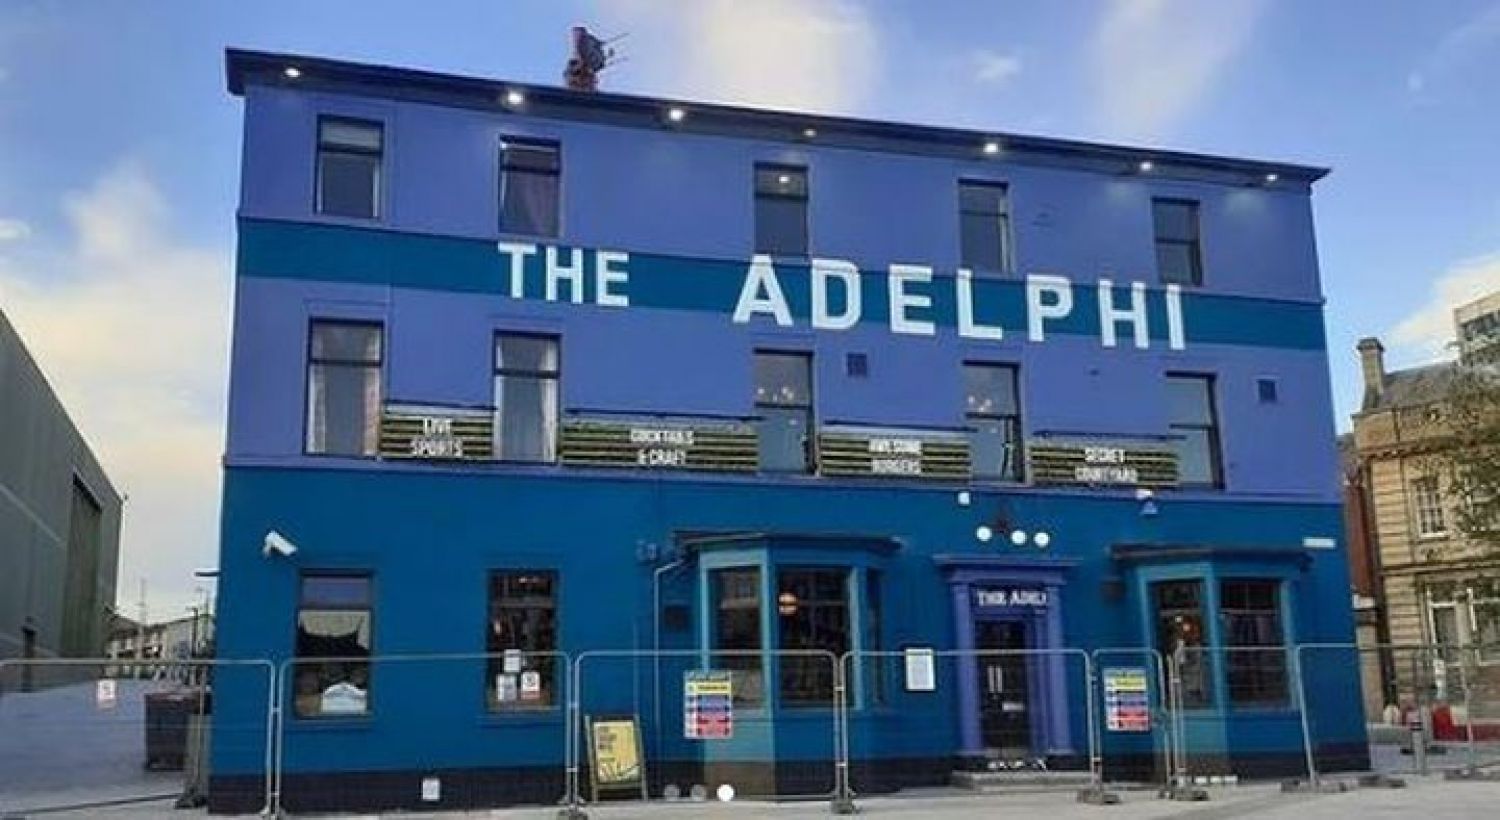 Adelphi Pub Gets New Makeover for Students and Locals